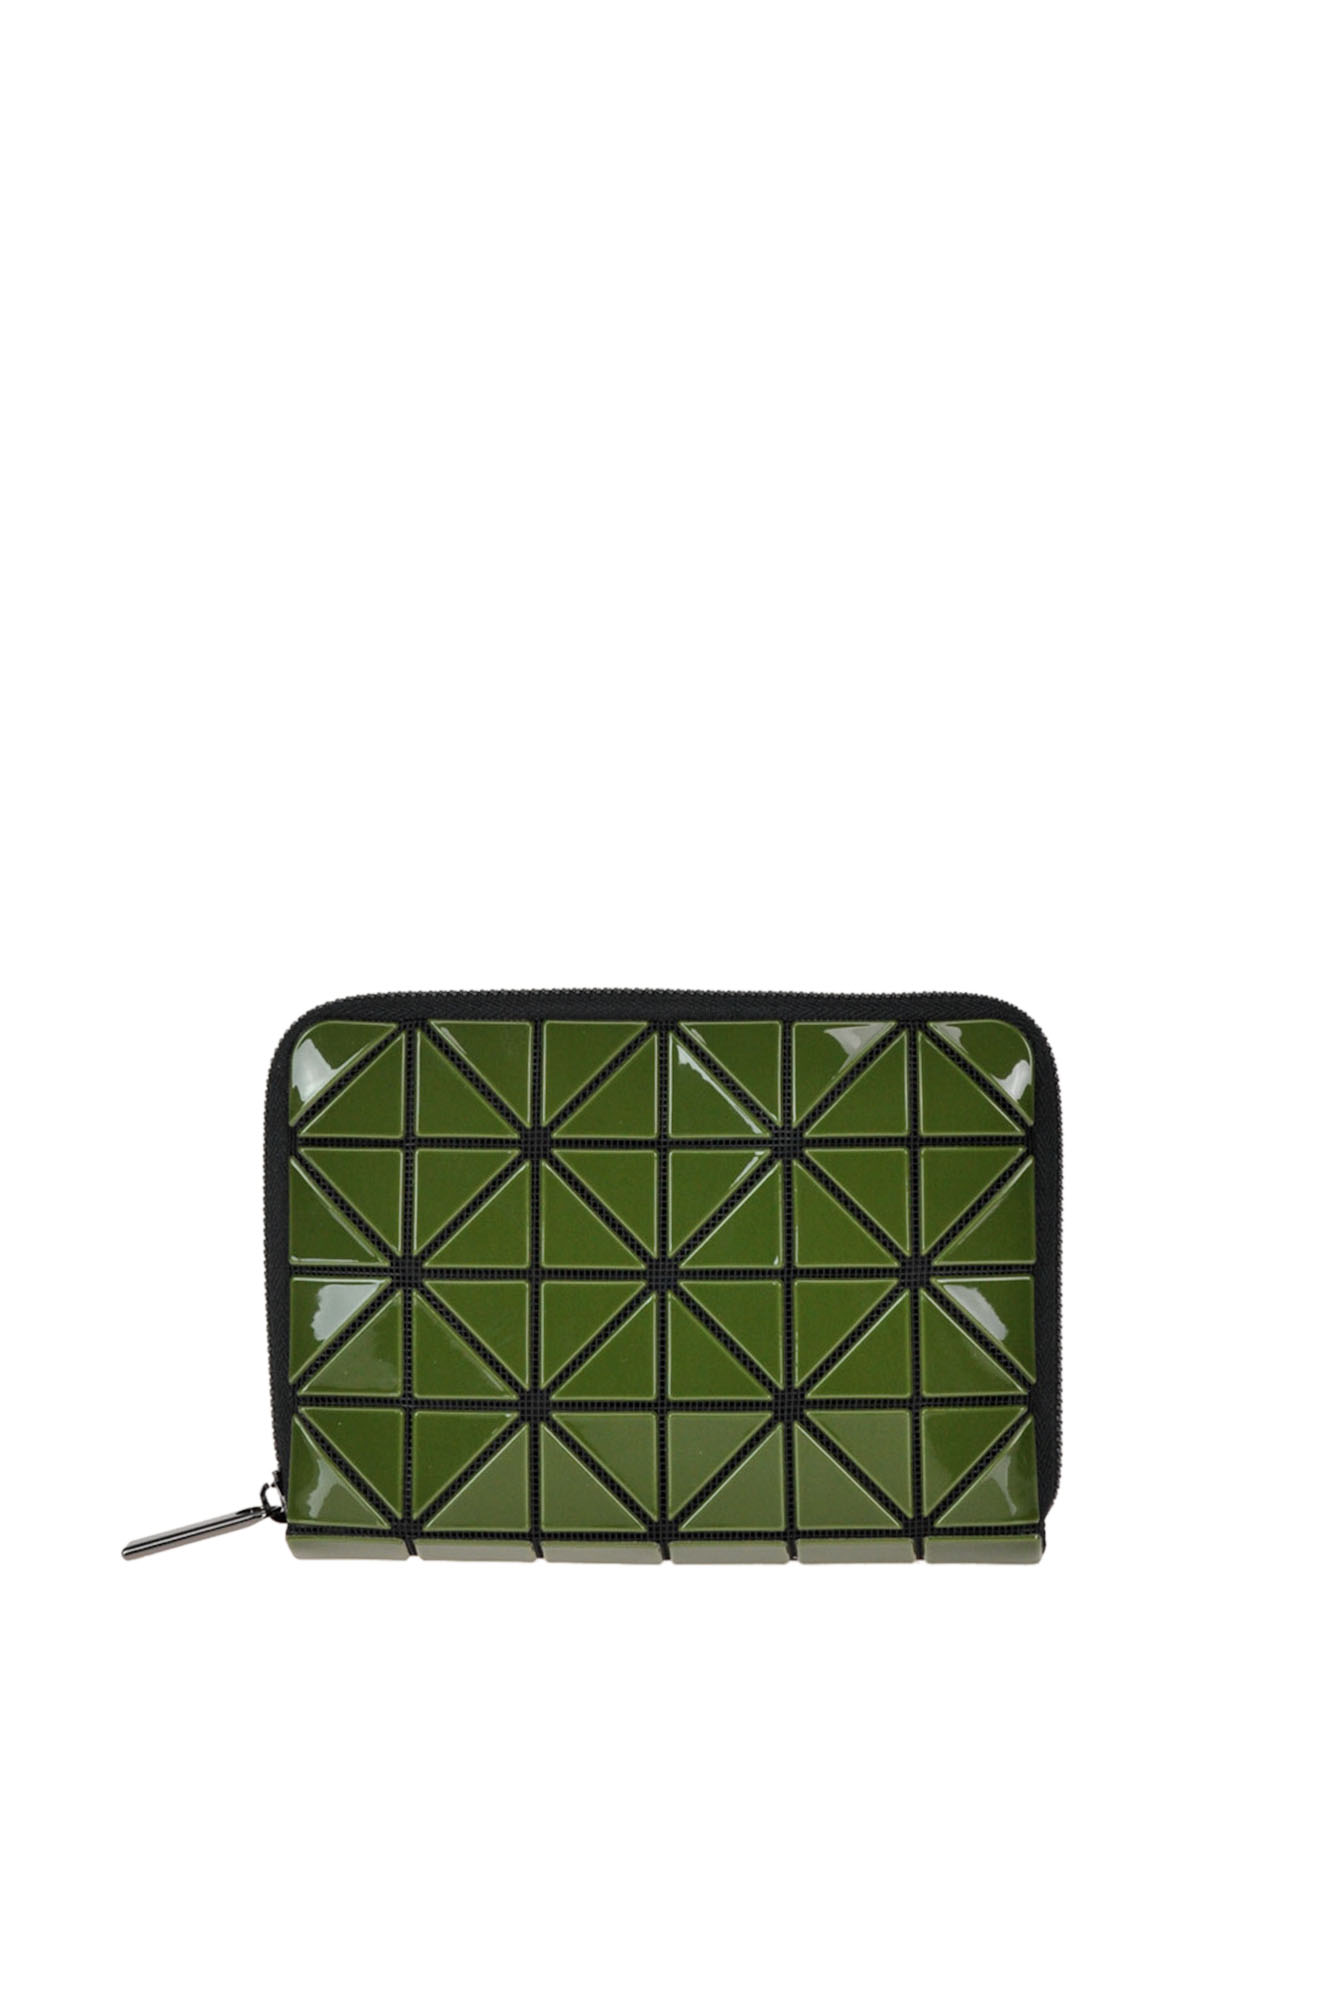 BAO BAO Issey Miyake Jam wallet - Buy online on Glamest Fashion Outlet ...